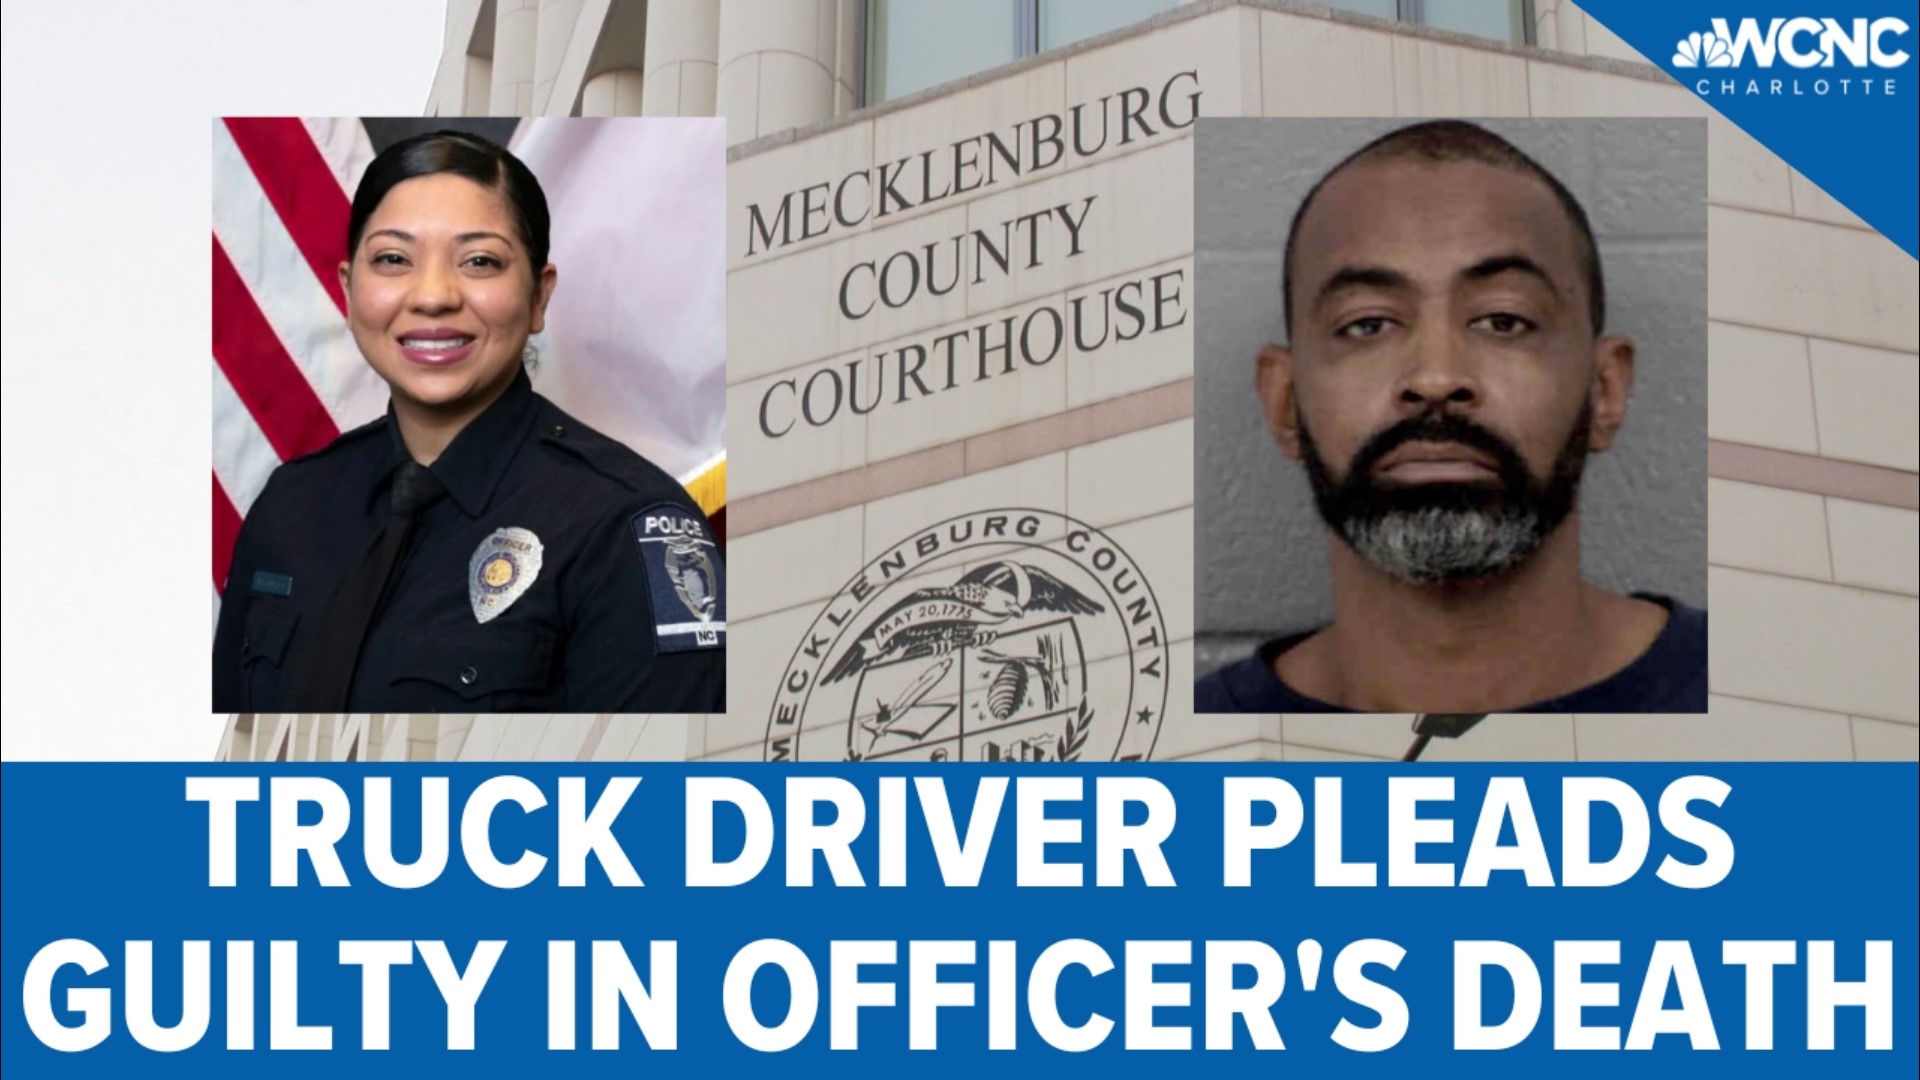 Daniel Morgan, the truck driver charged in the death of Charlotte-Mecklenburg police officer Mia Goodwin, pleaded guilty to all charges Thursday.